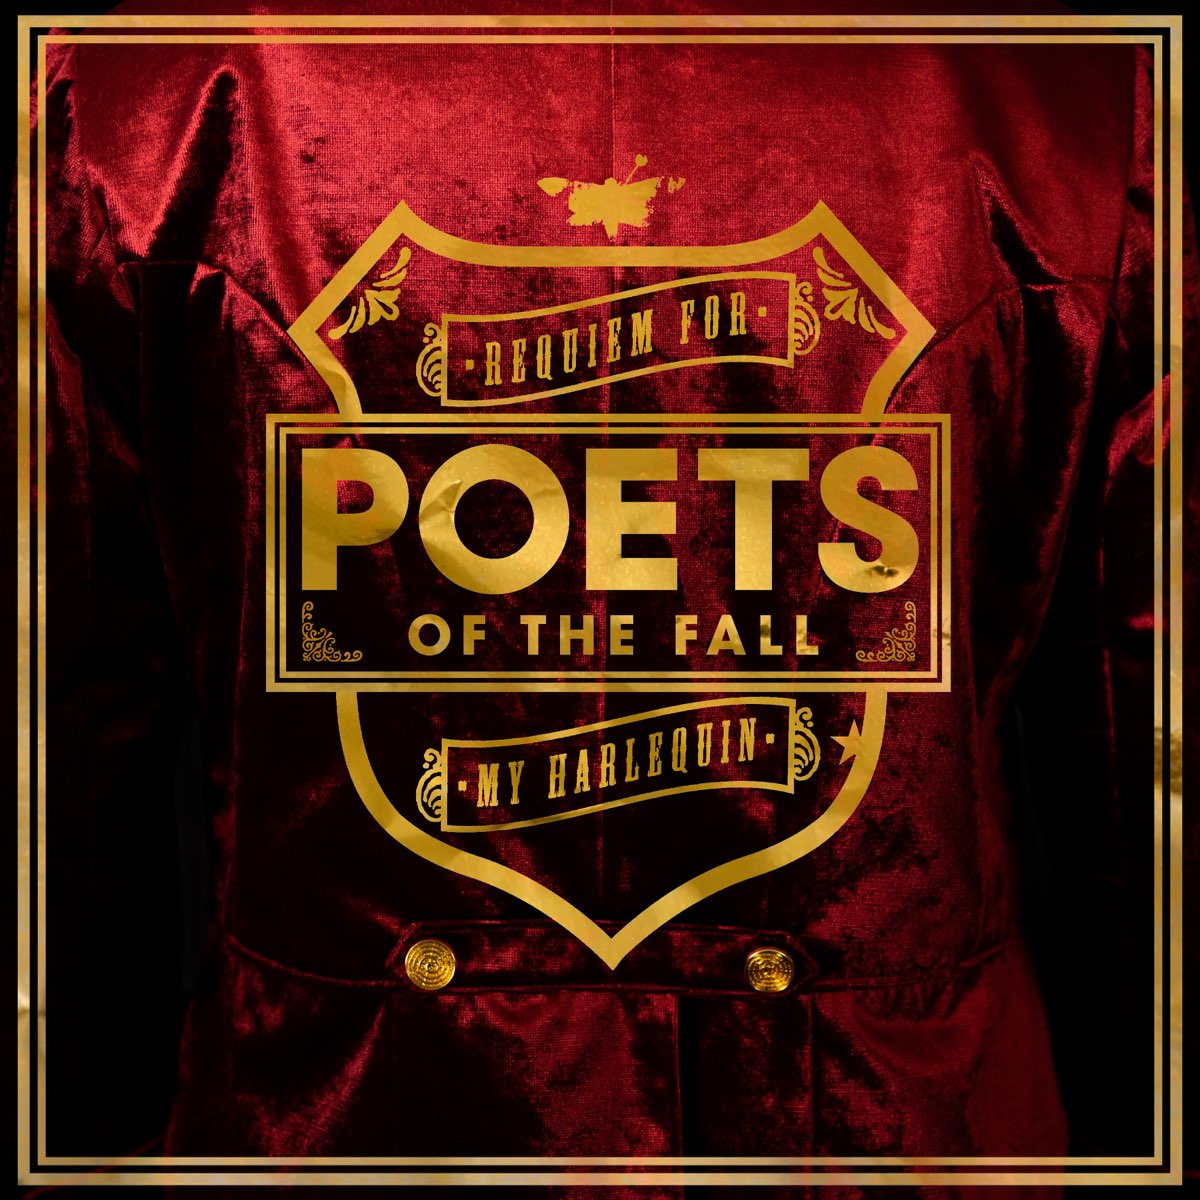 Poets of the fall carnival of rust carnival of скачать фото 35